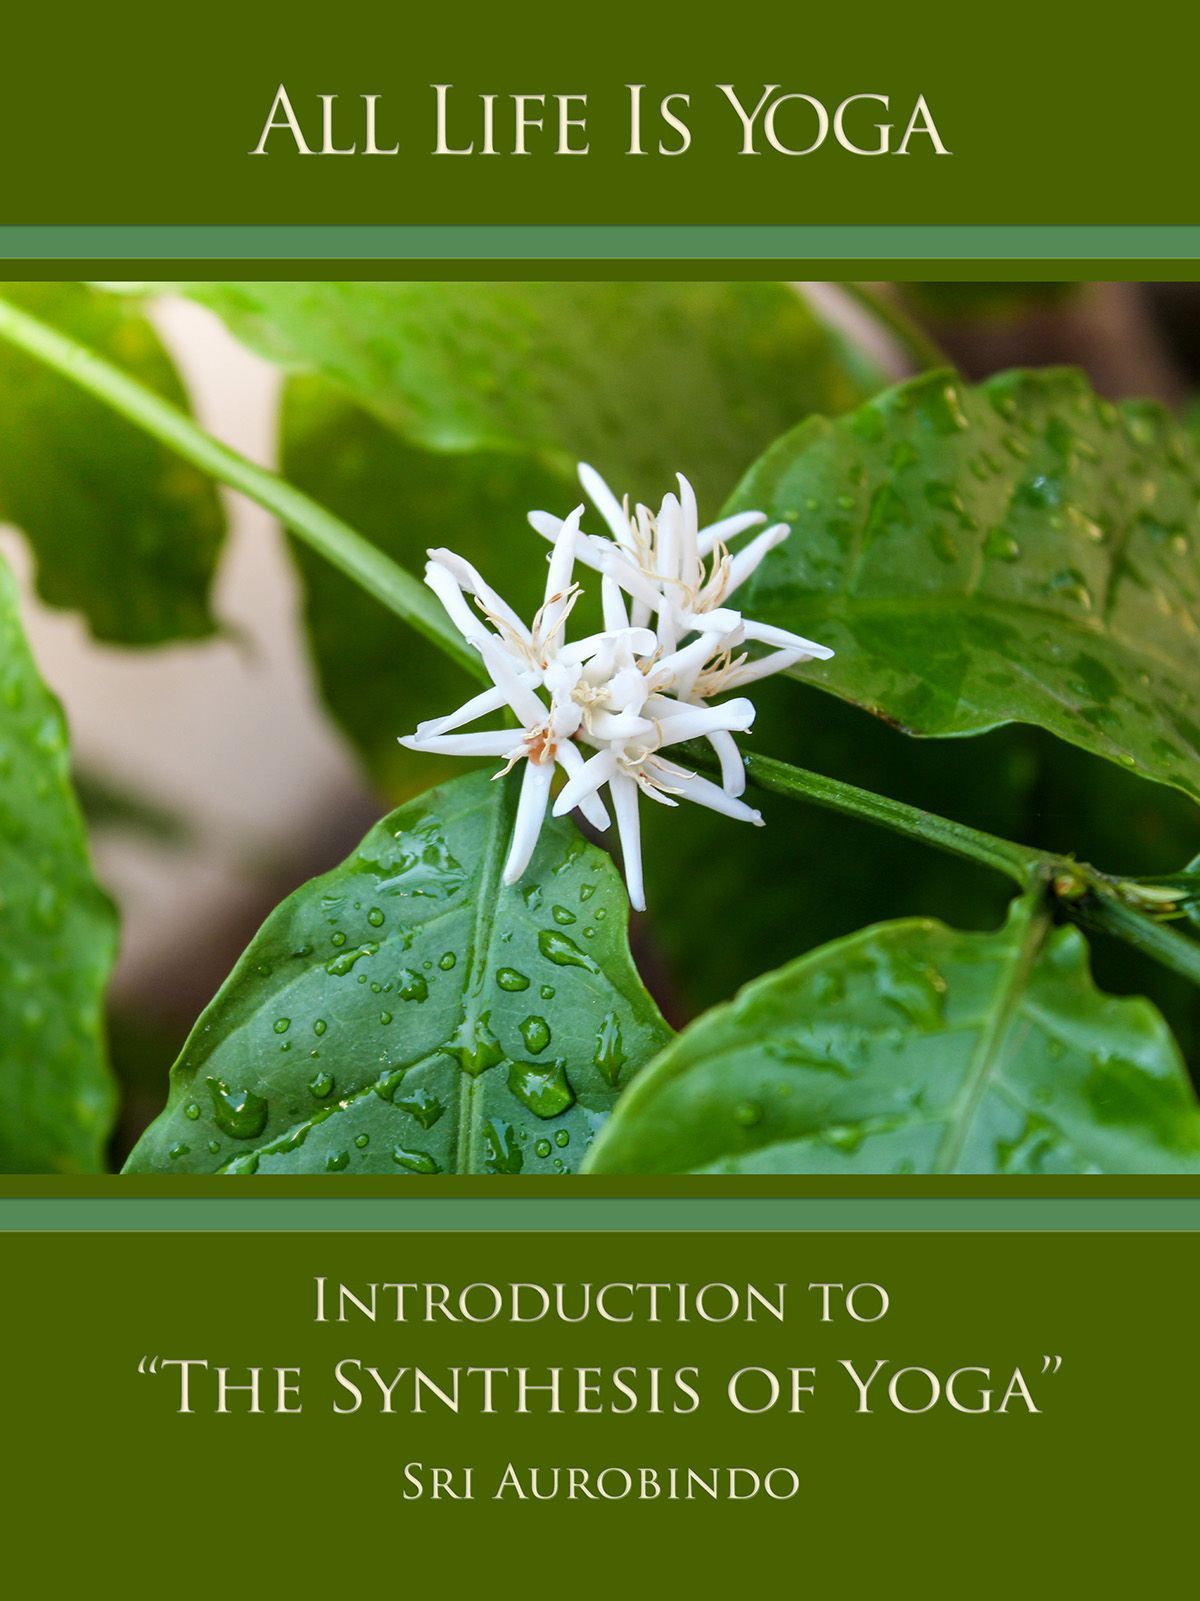 Introduction to The Synthesis of Yoga